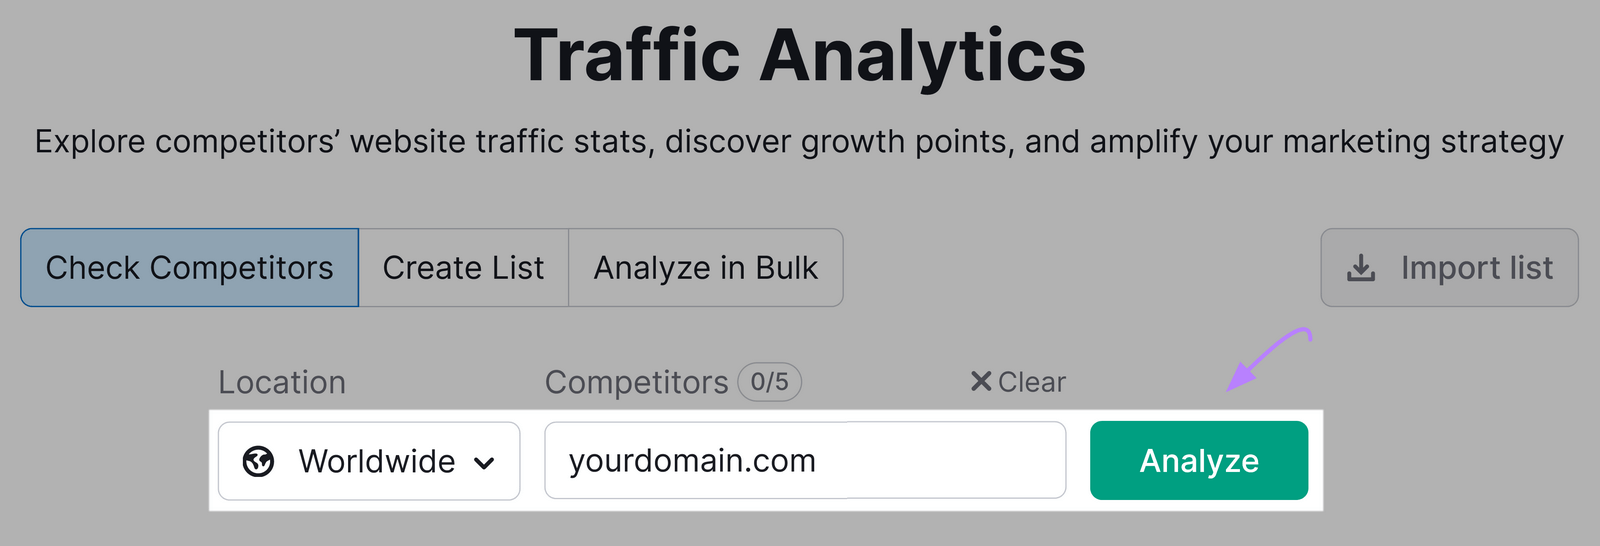 "yourdomain.com" in Traffic Analytics search bar